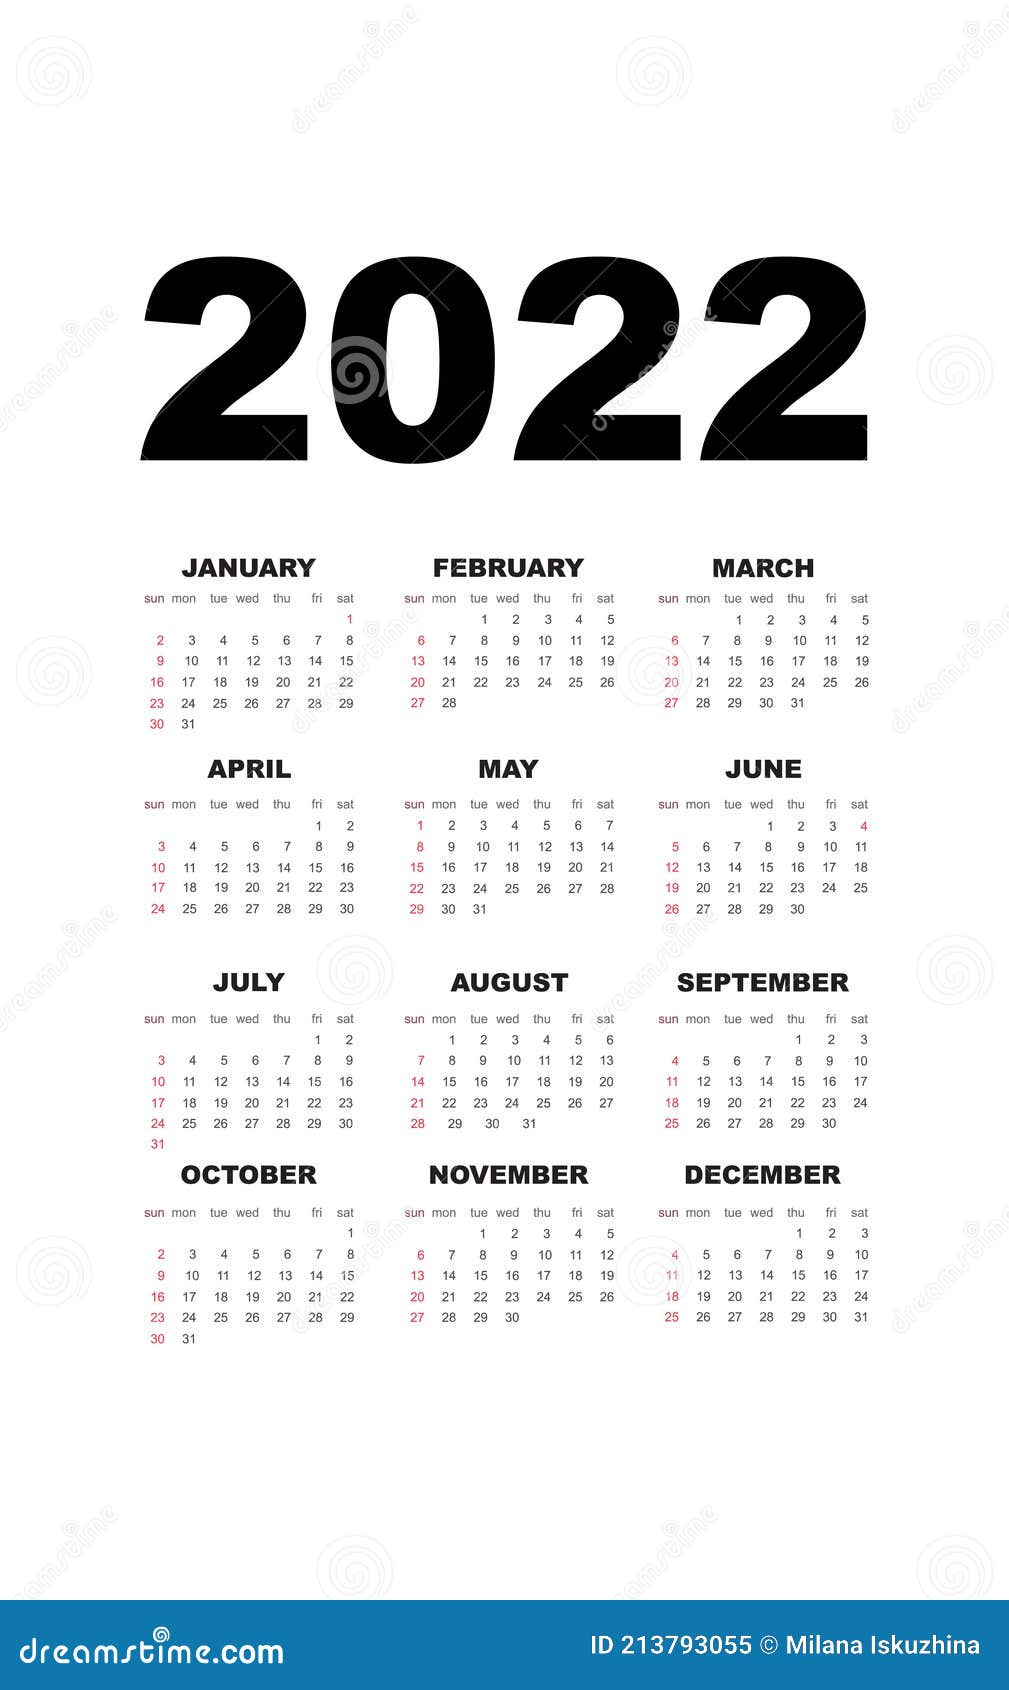 Calendar For 2022 Calendar Template Design In Black And White Colors Holidays In Red Colors Stock Vector Illustration Of Month Office 213793055